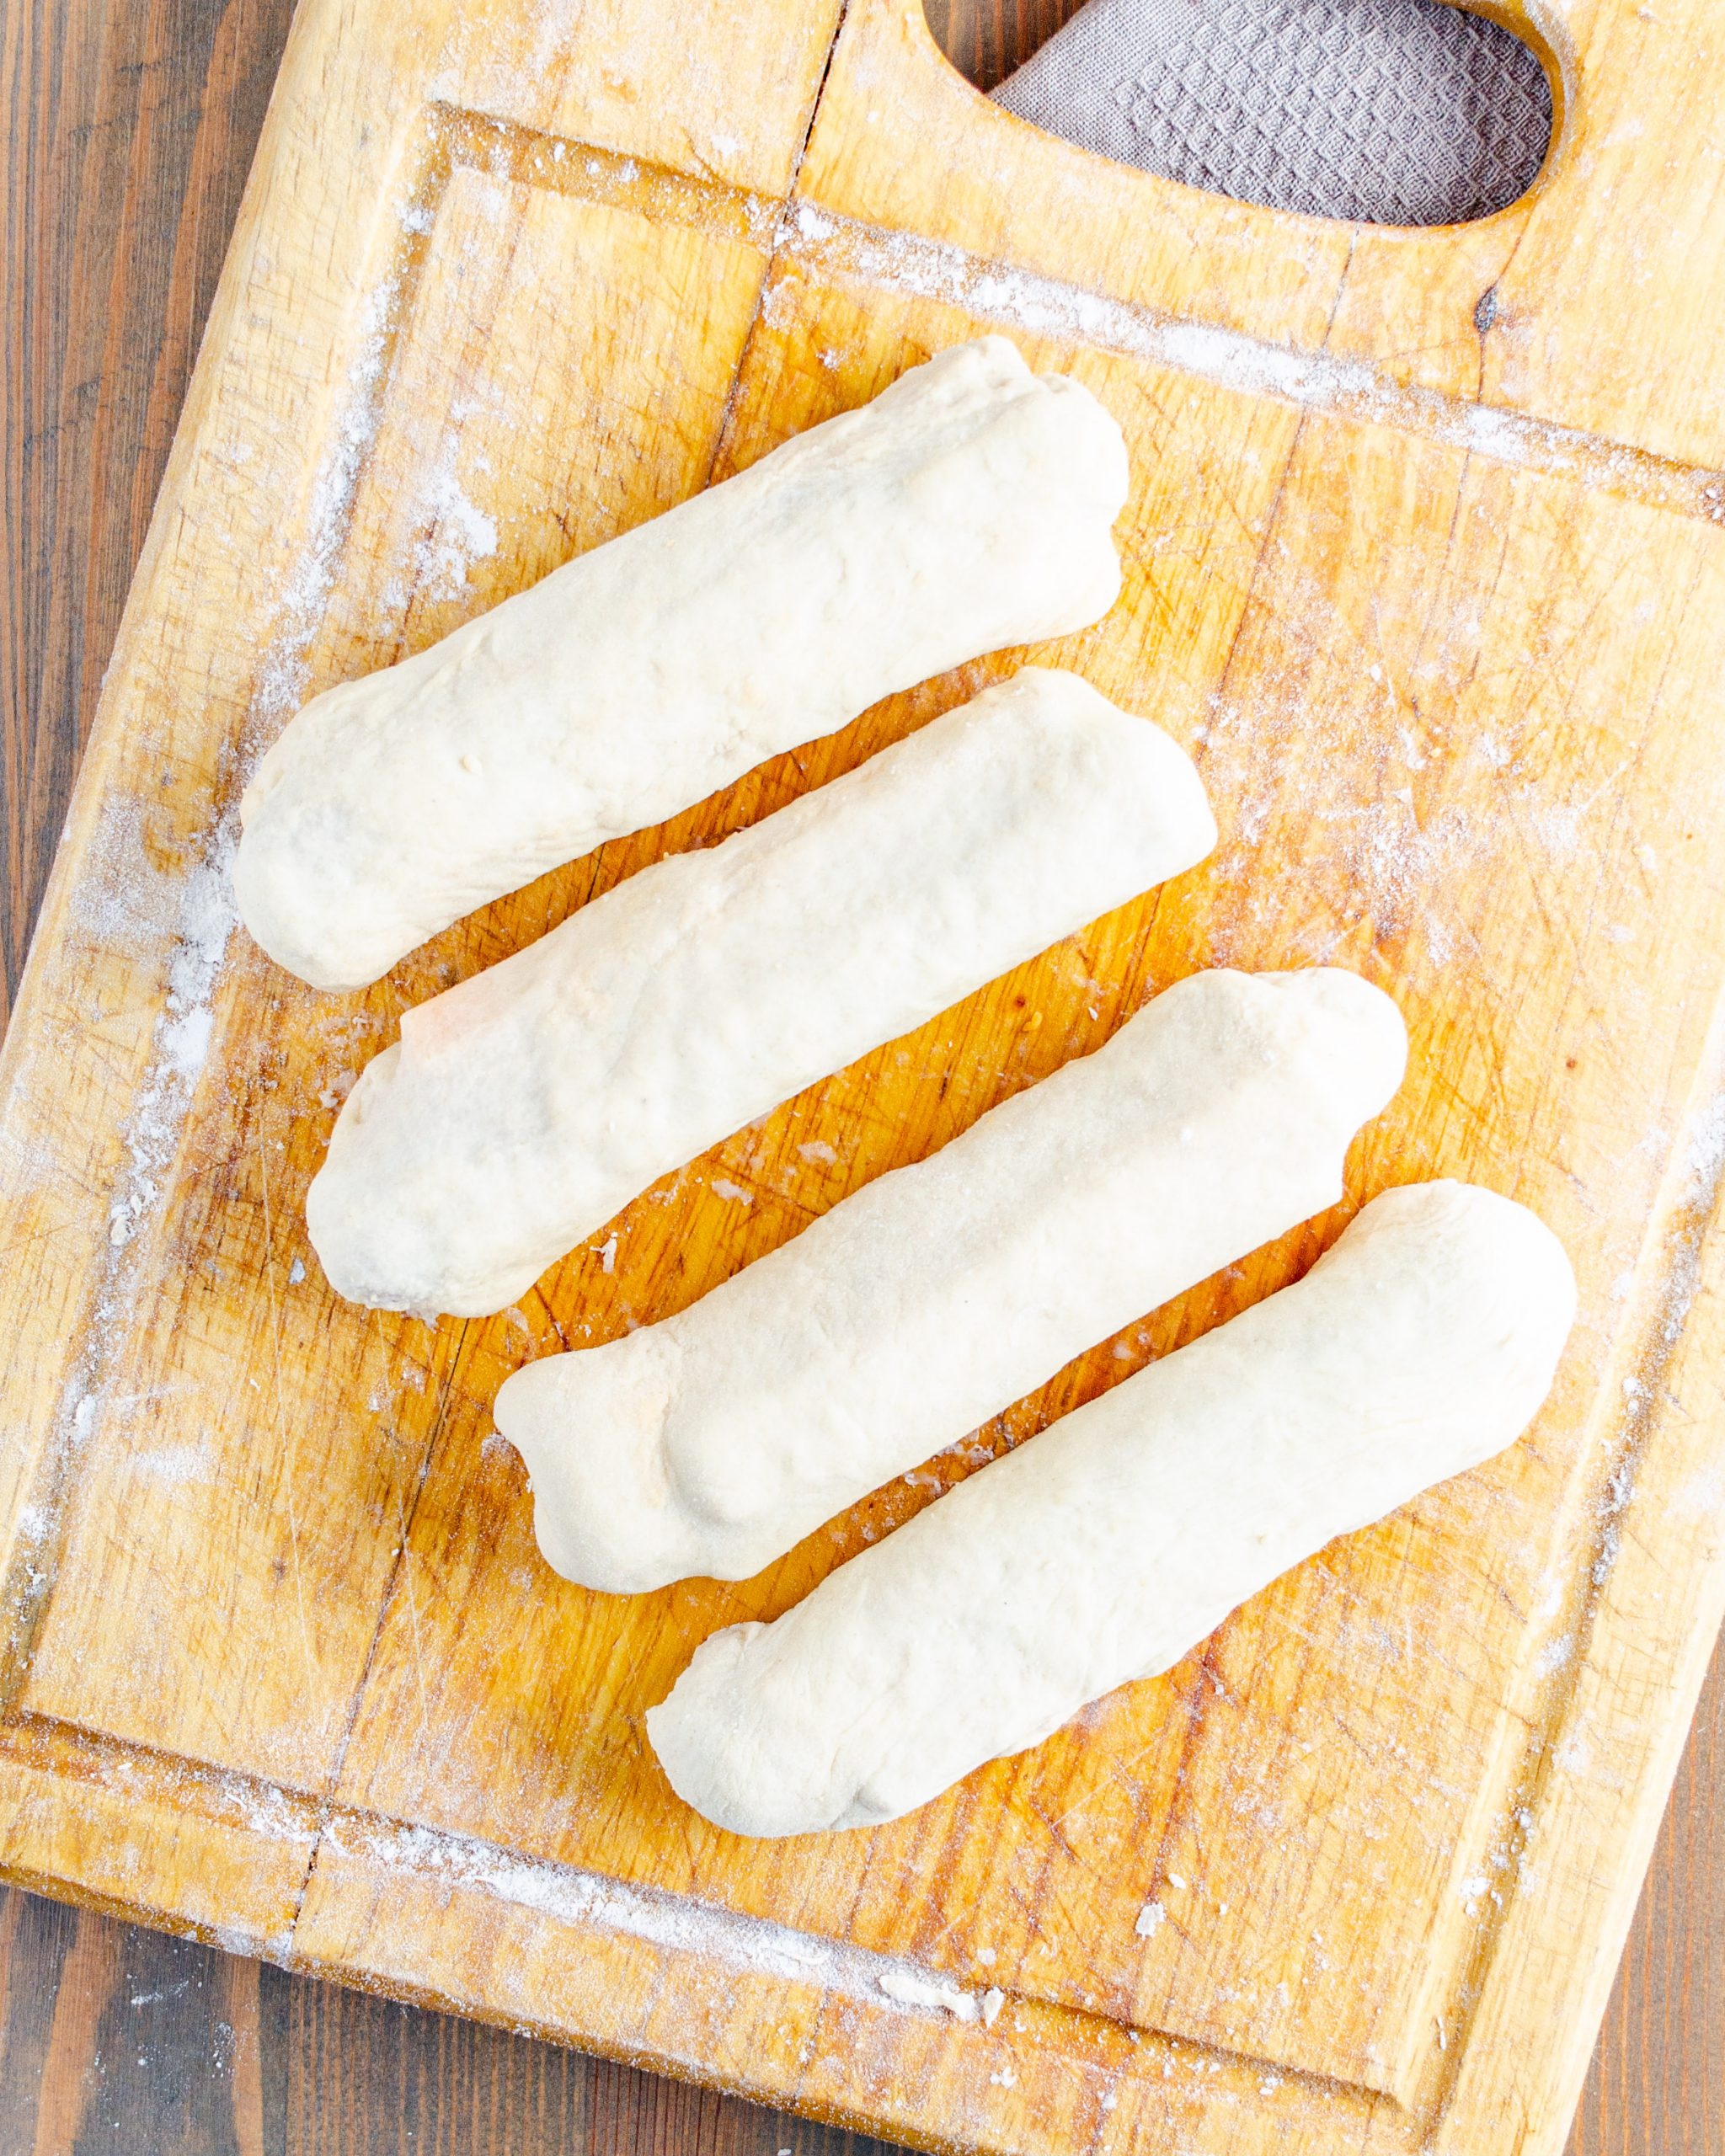 Fold the ends of the dough up and then roll the dough around the hotdog and cheese stick in the center.